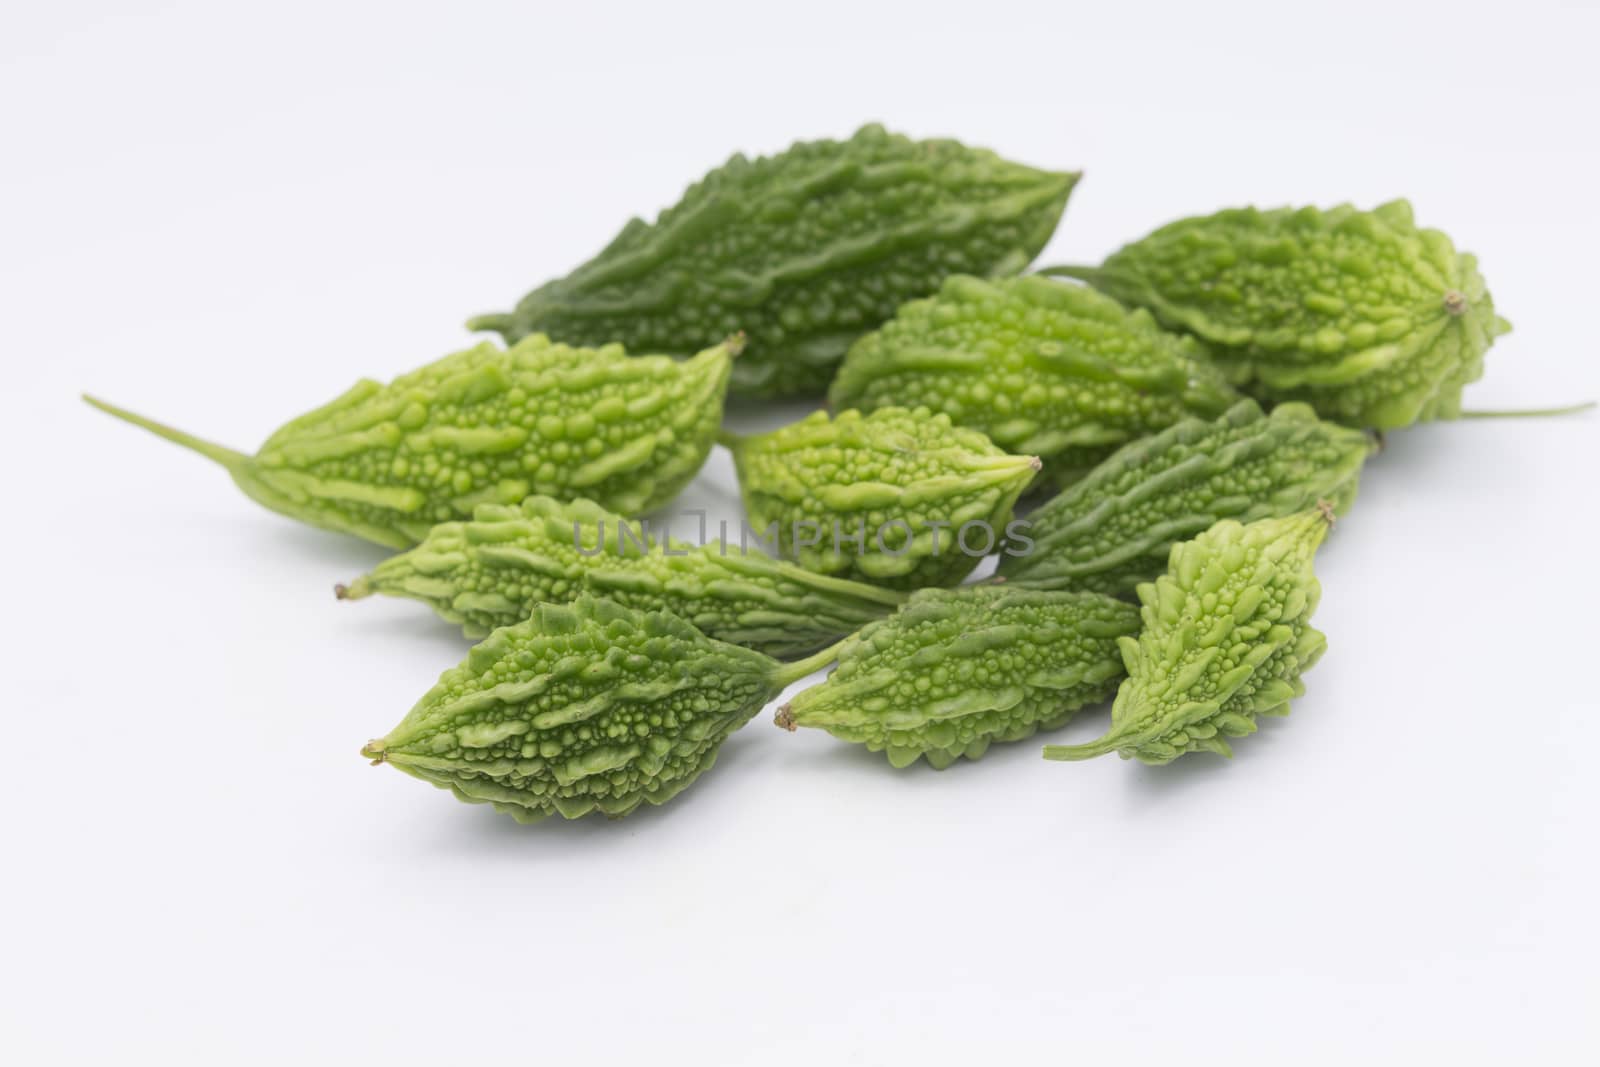 Green Momordica or karela with leaf isolate on white bacground by frank600